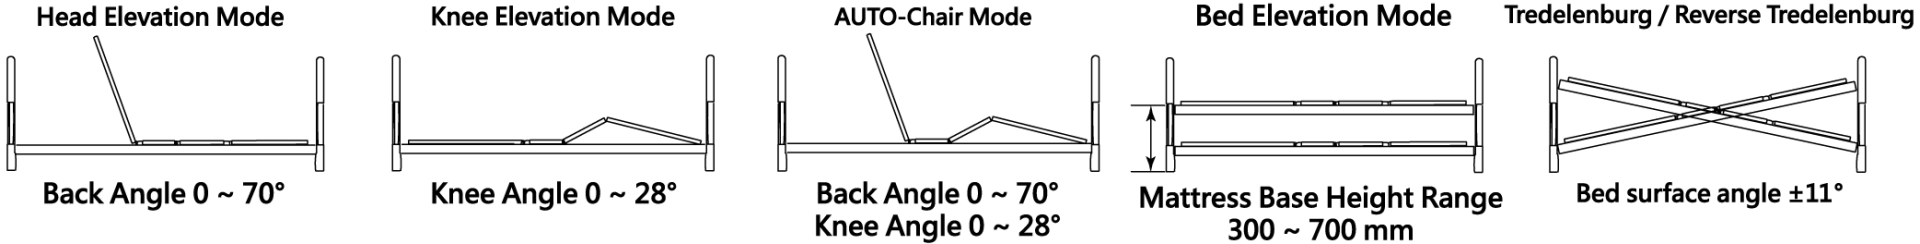 Joson-Care│HomeCare Electric Bed│EN-3M│Function Mode Bed Lift Angle Diagram